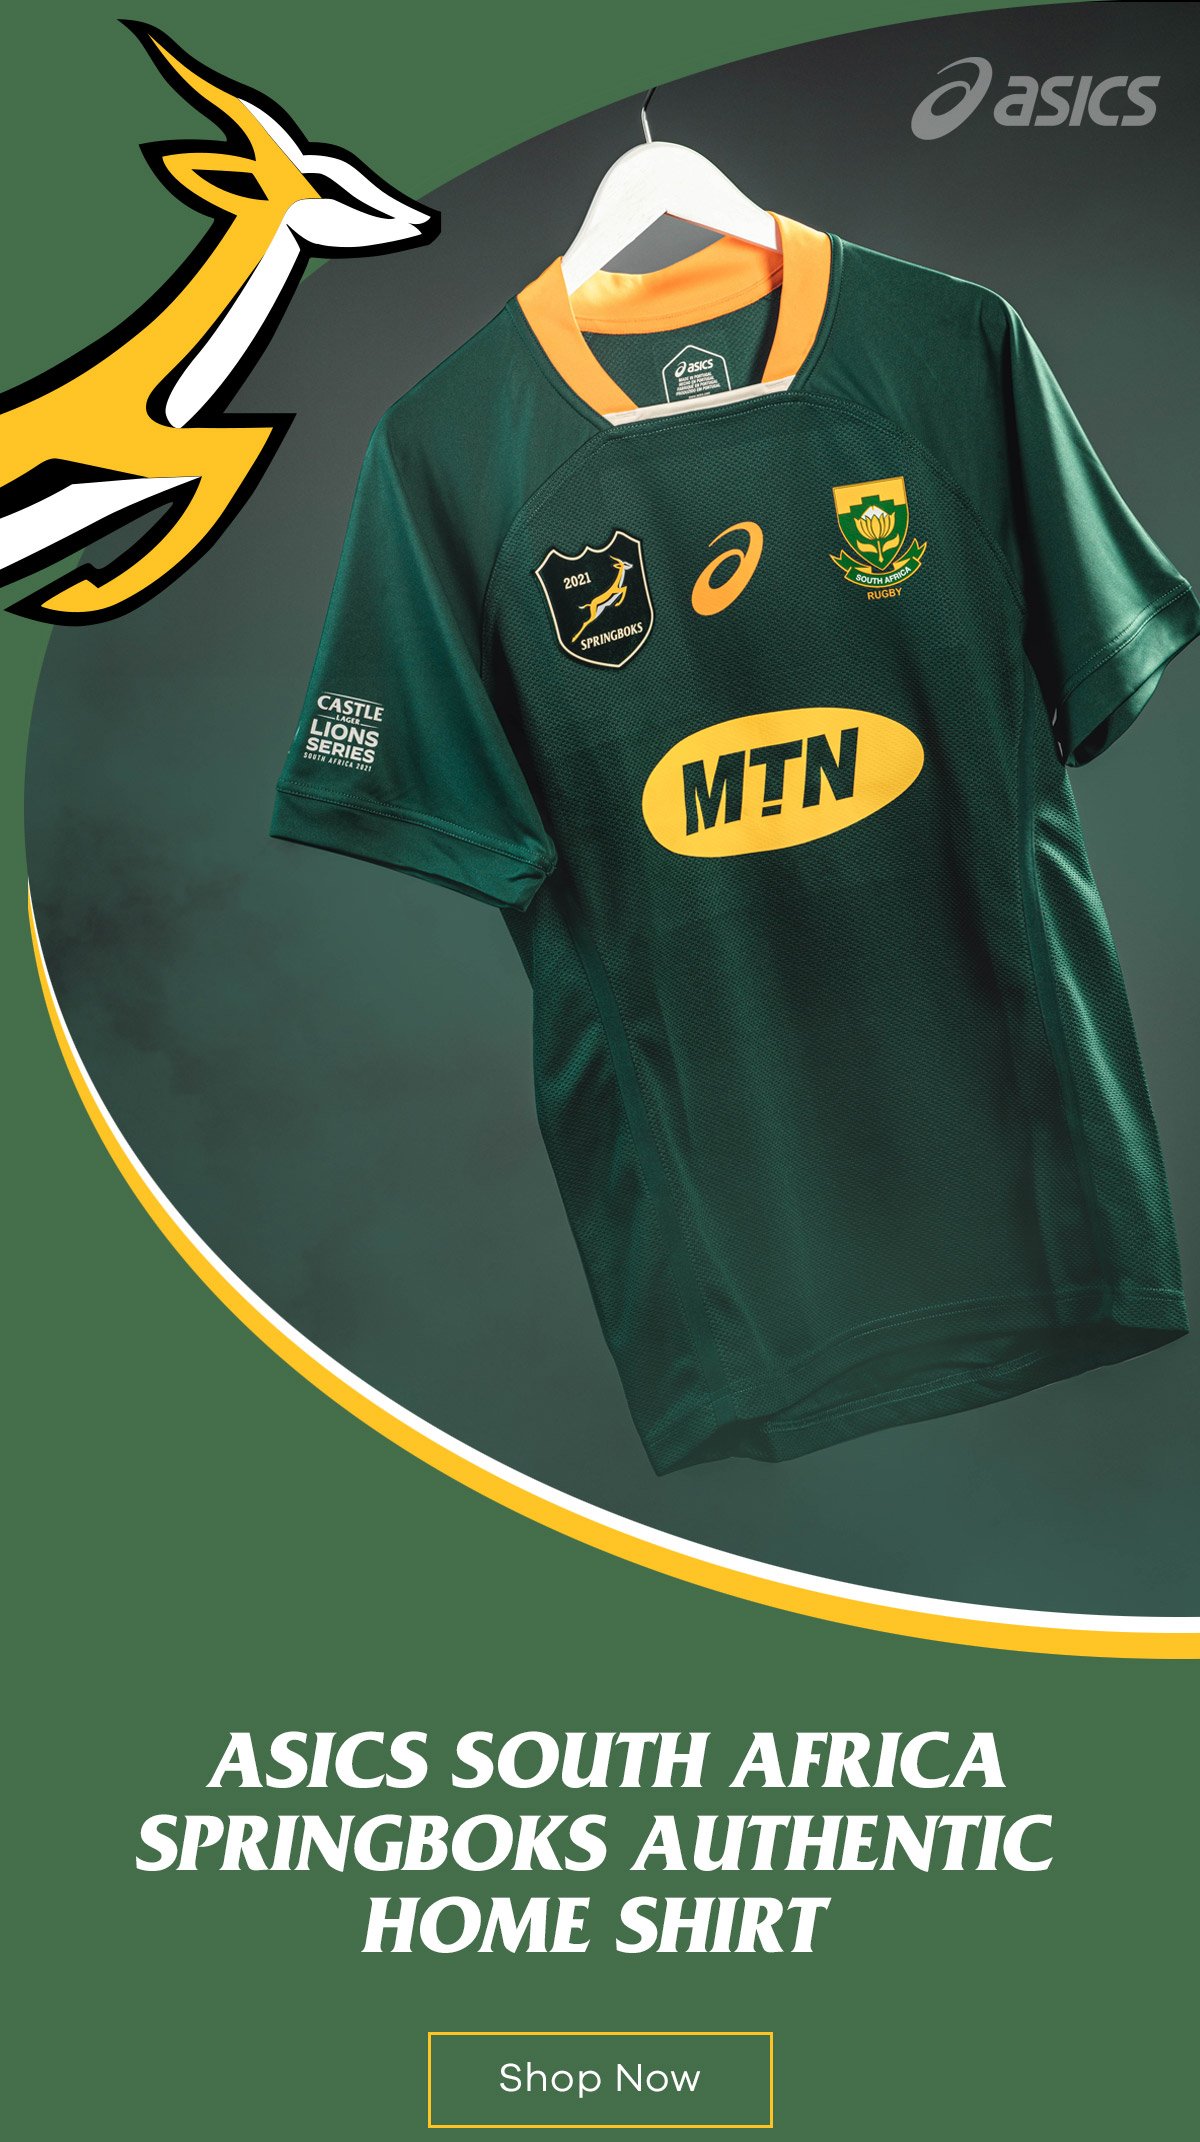 Springboks jersey for Lions 2021 series released - Rugby World